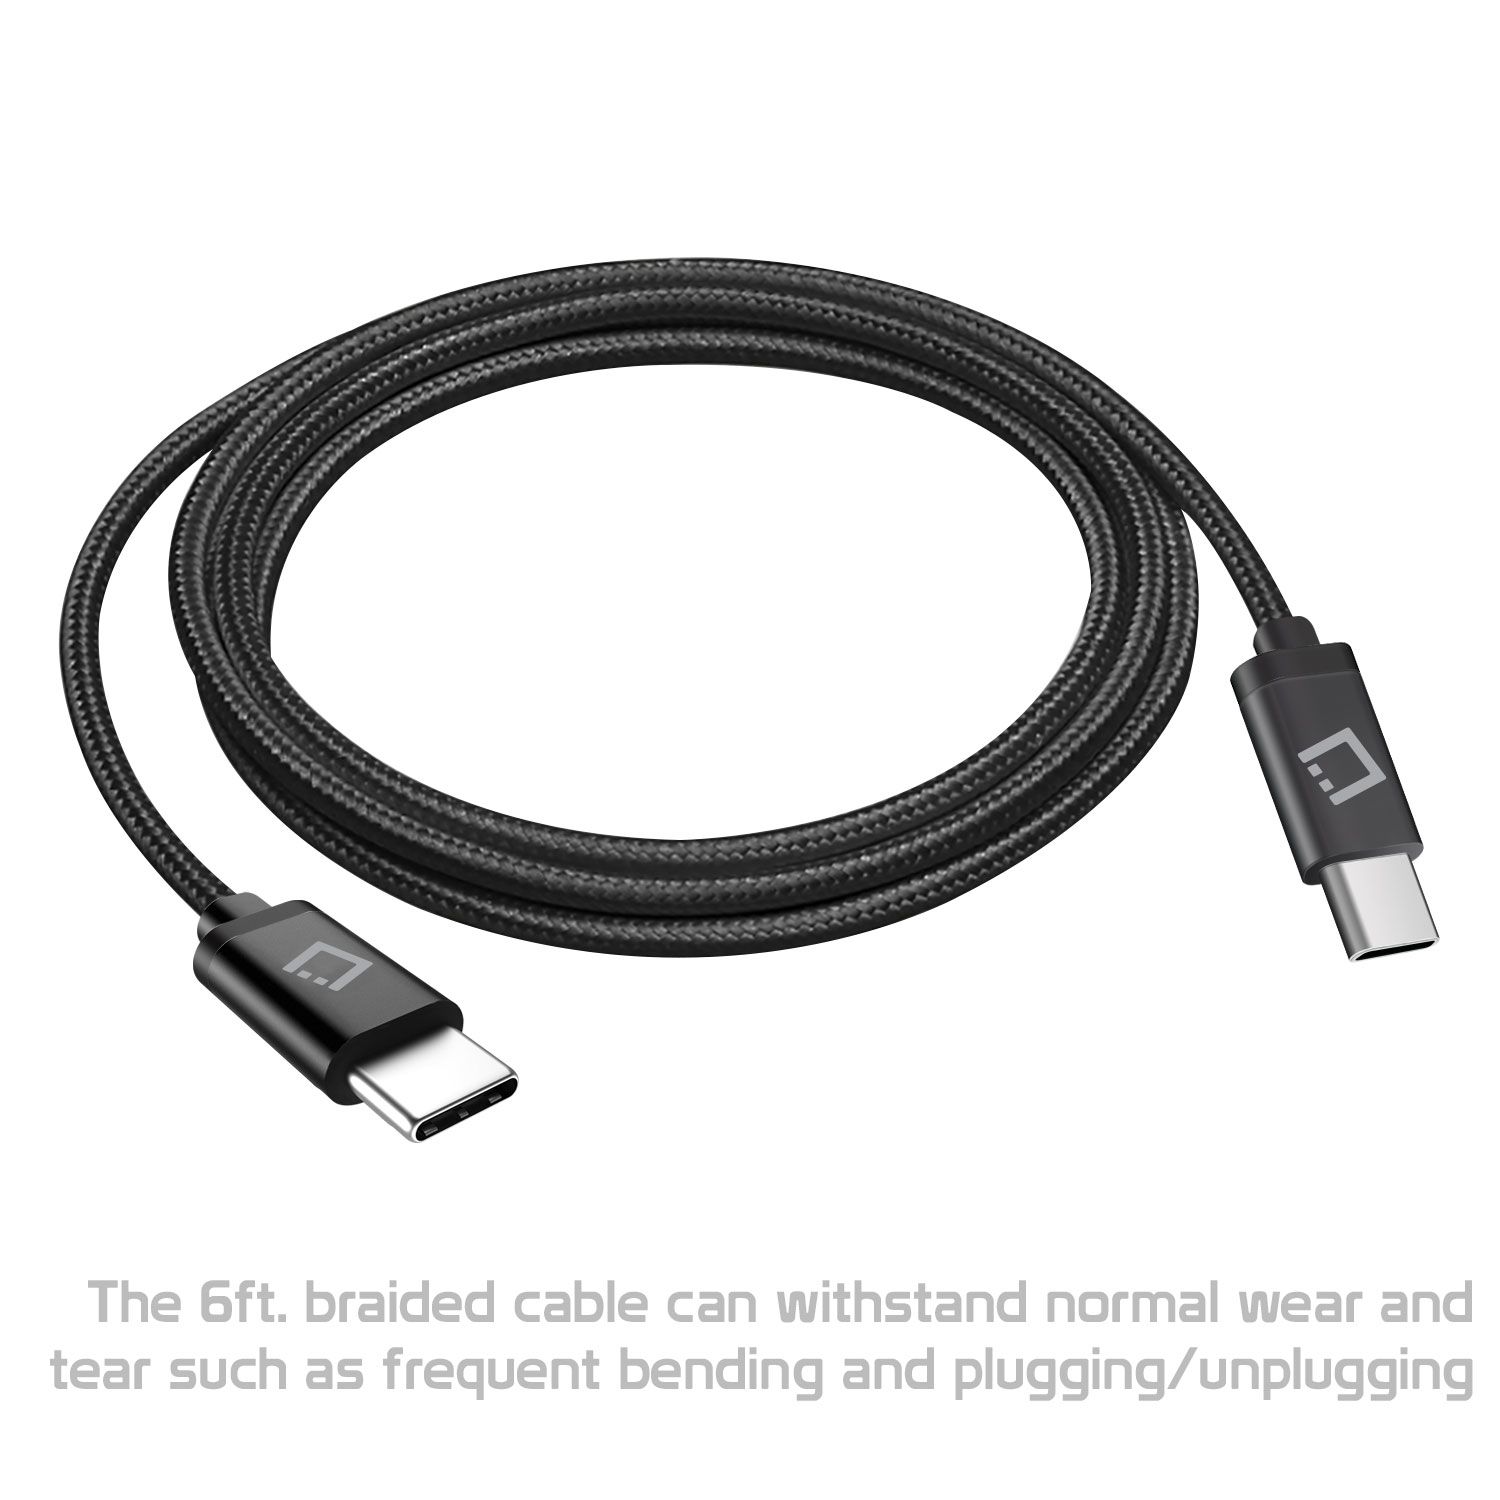 Cellet USB-C to USB-C Cable Compatible with Samsung Galaxy S20, S20+ Plus, S20 Ultra, Heavy Duty Braided USB Type-C to Type-C Cable (6 feet/1.8 meters) and Atom Wipe - image 5 of 9